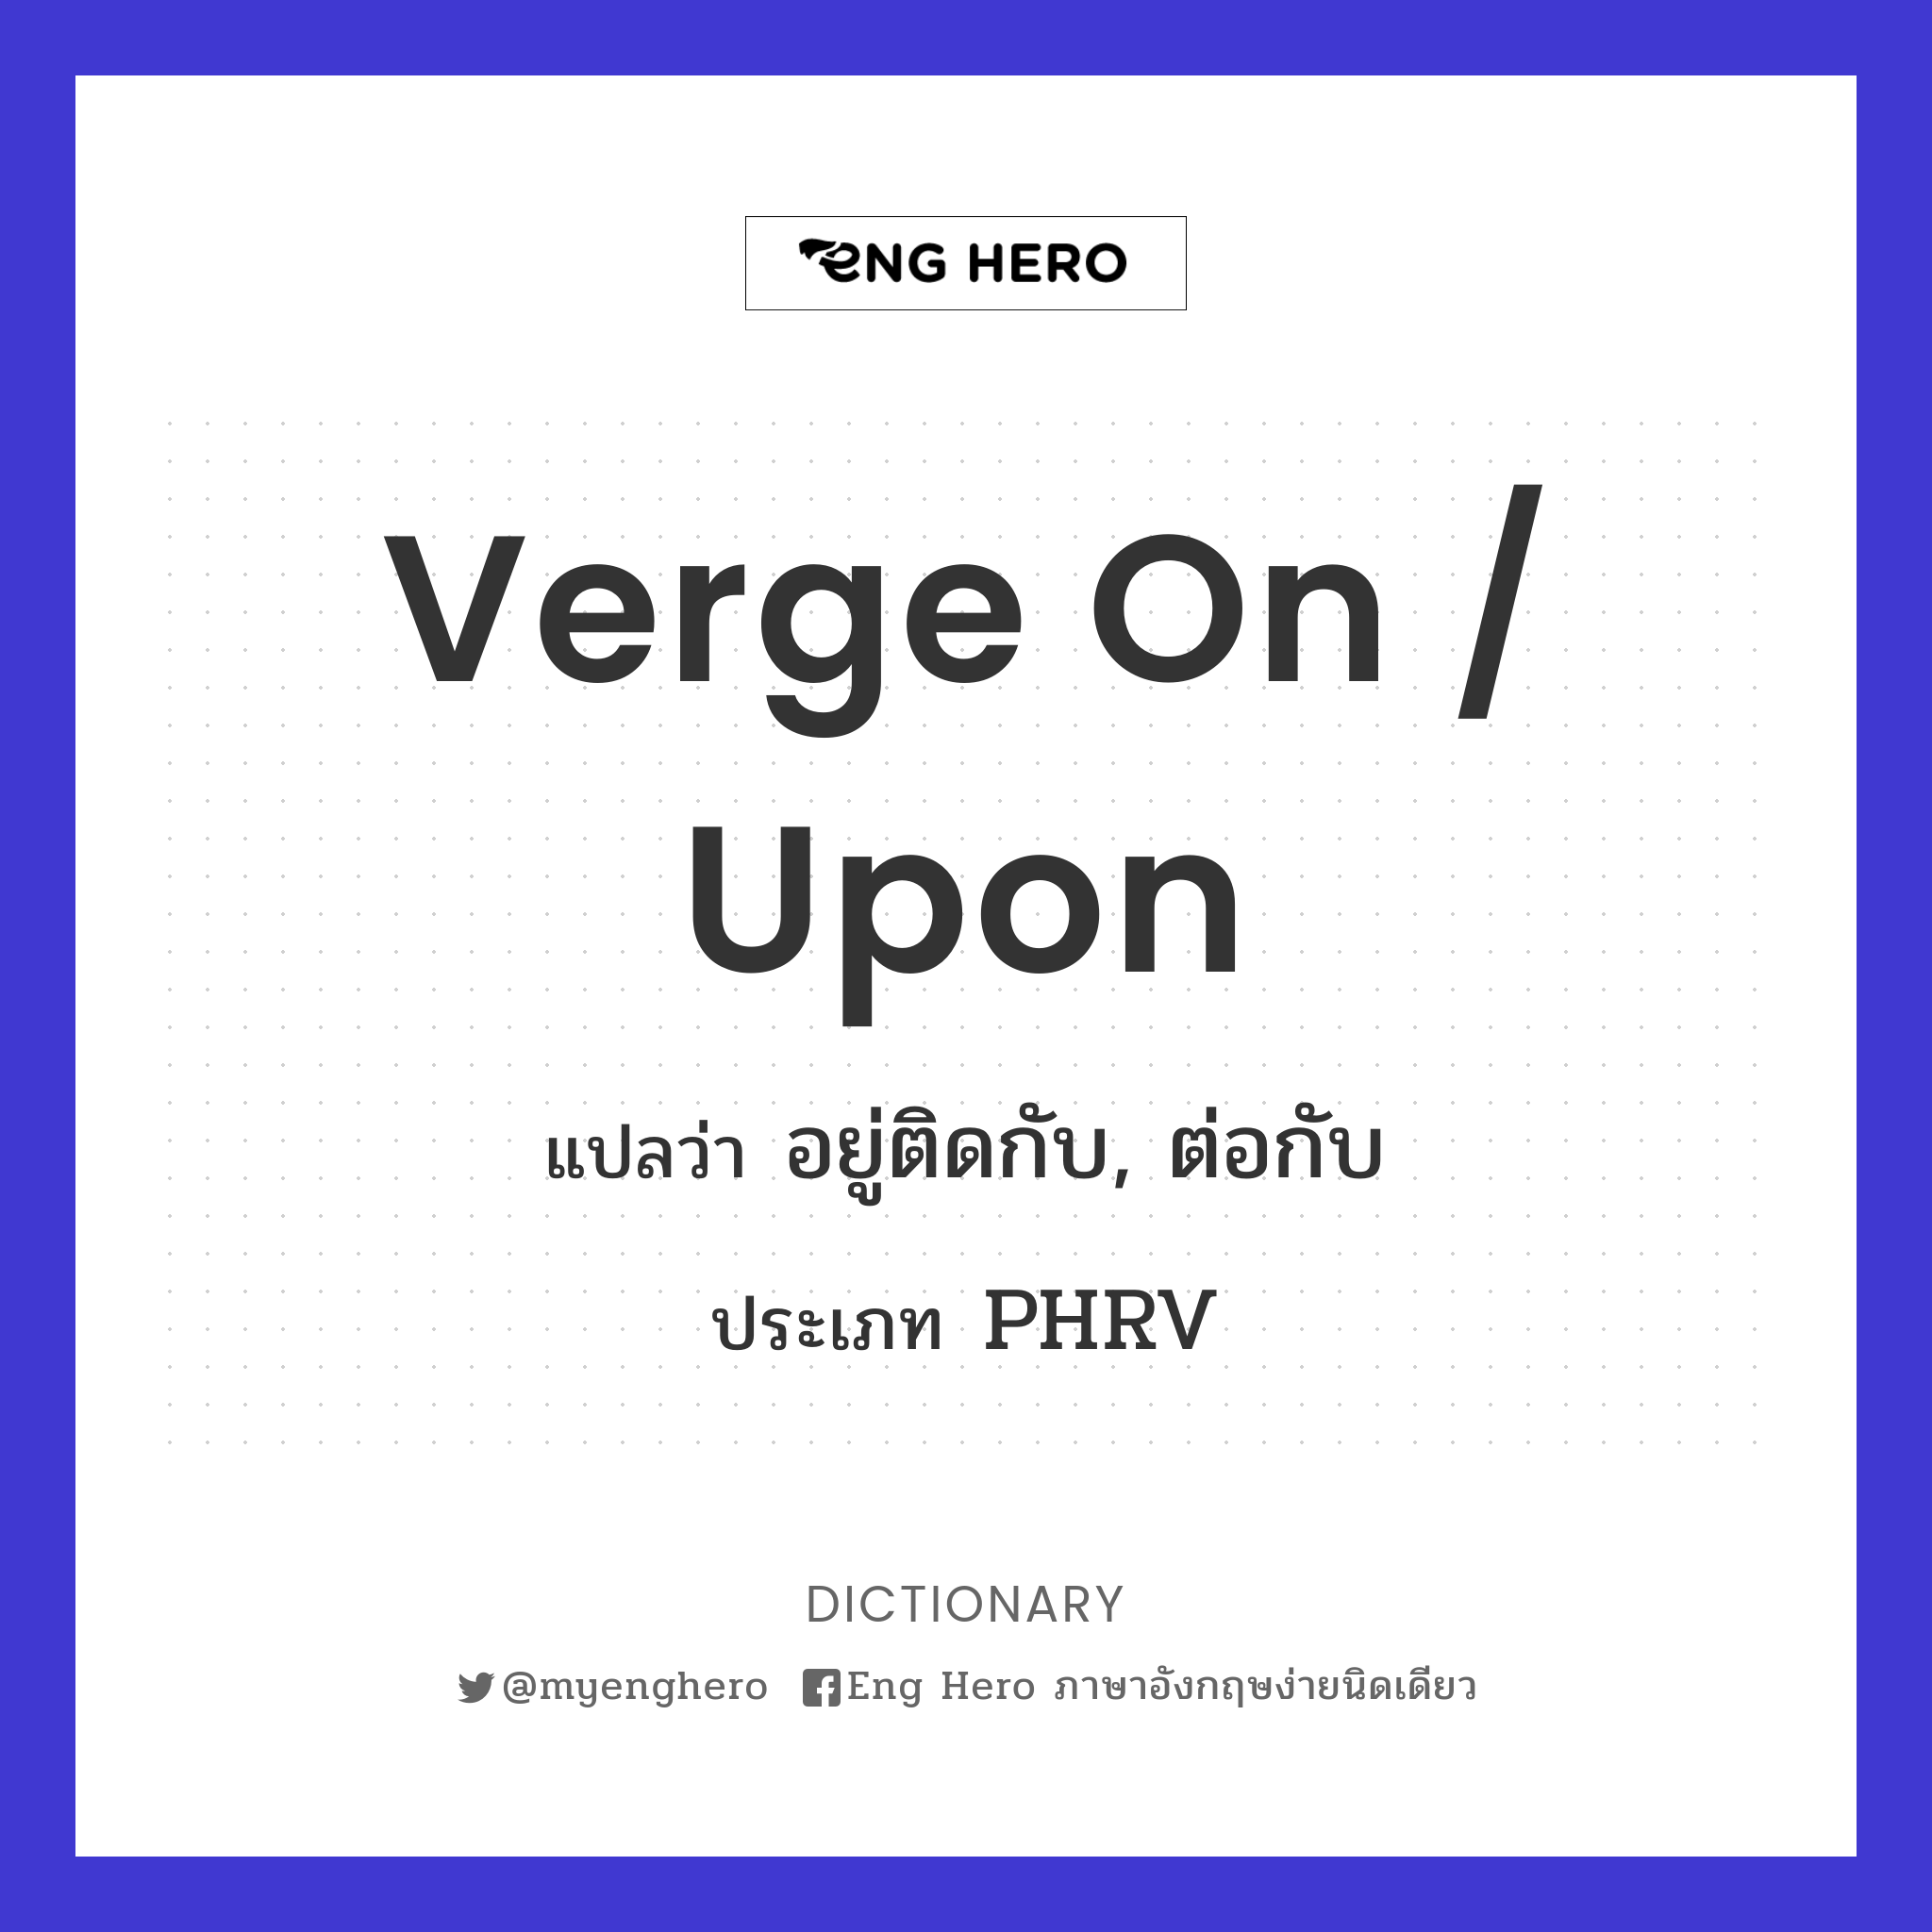 verge on / upon